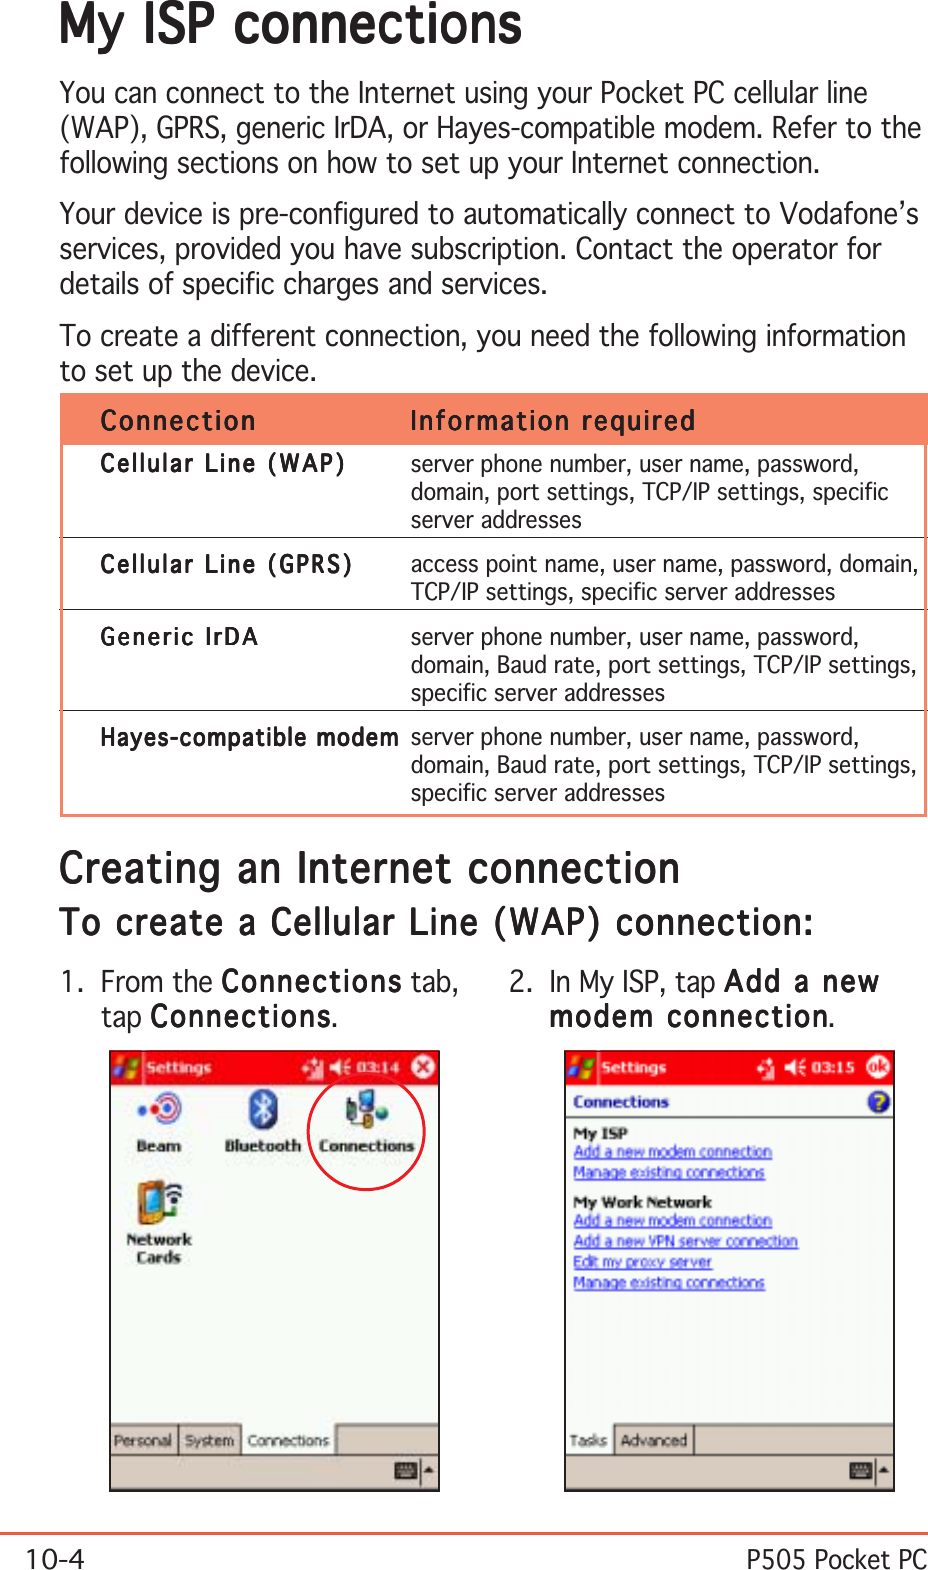 10-4P505 Pocket PCConnectionConnectionConnectionConnectionConnection Information requiredInformation requiredInformation requiredInformation requiredInformation requiredCellular Line (WAP)Cellular Line (WAP)Cellular Line (WAP)Cellular Line (WAP)C el l u l ar  L i ne  ( W A P) server phone number, user name, password,domain, port settings, TCP/IP settings, specificserver addressesCellular Line (GPRS)Cellular Line (GPRS)Cellular Line (GPRS)Cellular Line (GPRS)C el l u l ar  L i n e  ( G P RS) access point name, user name, password, domain,TCP/IP settings, specific server addressesGeneric IrDAGeneric IrDAGeneric IrDAGeneric IrDAG e n e r i c  I r D A server phone number, user name, password,domain, Baud rate, port settings, TCP/IP settings,specific server addressesHayes-compatible modemHayes-compatible modemHayes-compatible modemHayes-compatible modemHayes-compatible modem server phone number, user name, password,domain, Baud rate, port settings, TCP/IP settings,specific server addressesCreating an Internet connectionCreating an Internet connectionCreating an Internet connectionCreating an Internet connectionCreating an Internet connectionTo create a Cellular Line (WAP) connection:To create a Cellular Line (WAP) connection:To create a Cellular Line (WAP) connection:To create a Cellular Line (WAP) connection:To create a Cellular Line (WAP) connection:1. From the ConnectionsConnectionsConnectionsConnectionsConnections tab,tap ConnectionsConnectionsConnectionsConnectionsConnections.2. In My ISP, tap Add a newAdd a newAdd a newAdd a newAdd a newmodem connectionmodem connectionmodem connectionmodem connectionmodem connection.My ISP connectionsMy ISP connectionsMy ISP connectionsMy ISP connectionsMy ISP connectionsYou can connect to the Internet using your Pocket PC cellular line(WAP), GPRS, generic IrDA, or Hayes-compatible modem. Refer to thefollowing sections on how to set up your Internet connection.Your device is pre-configured to automatically connect to Vodafone’sservices, provided you have subscription. Contact the operator fordetails of specific charges and services.To create a different connection, you need the following informationto set up the device.